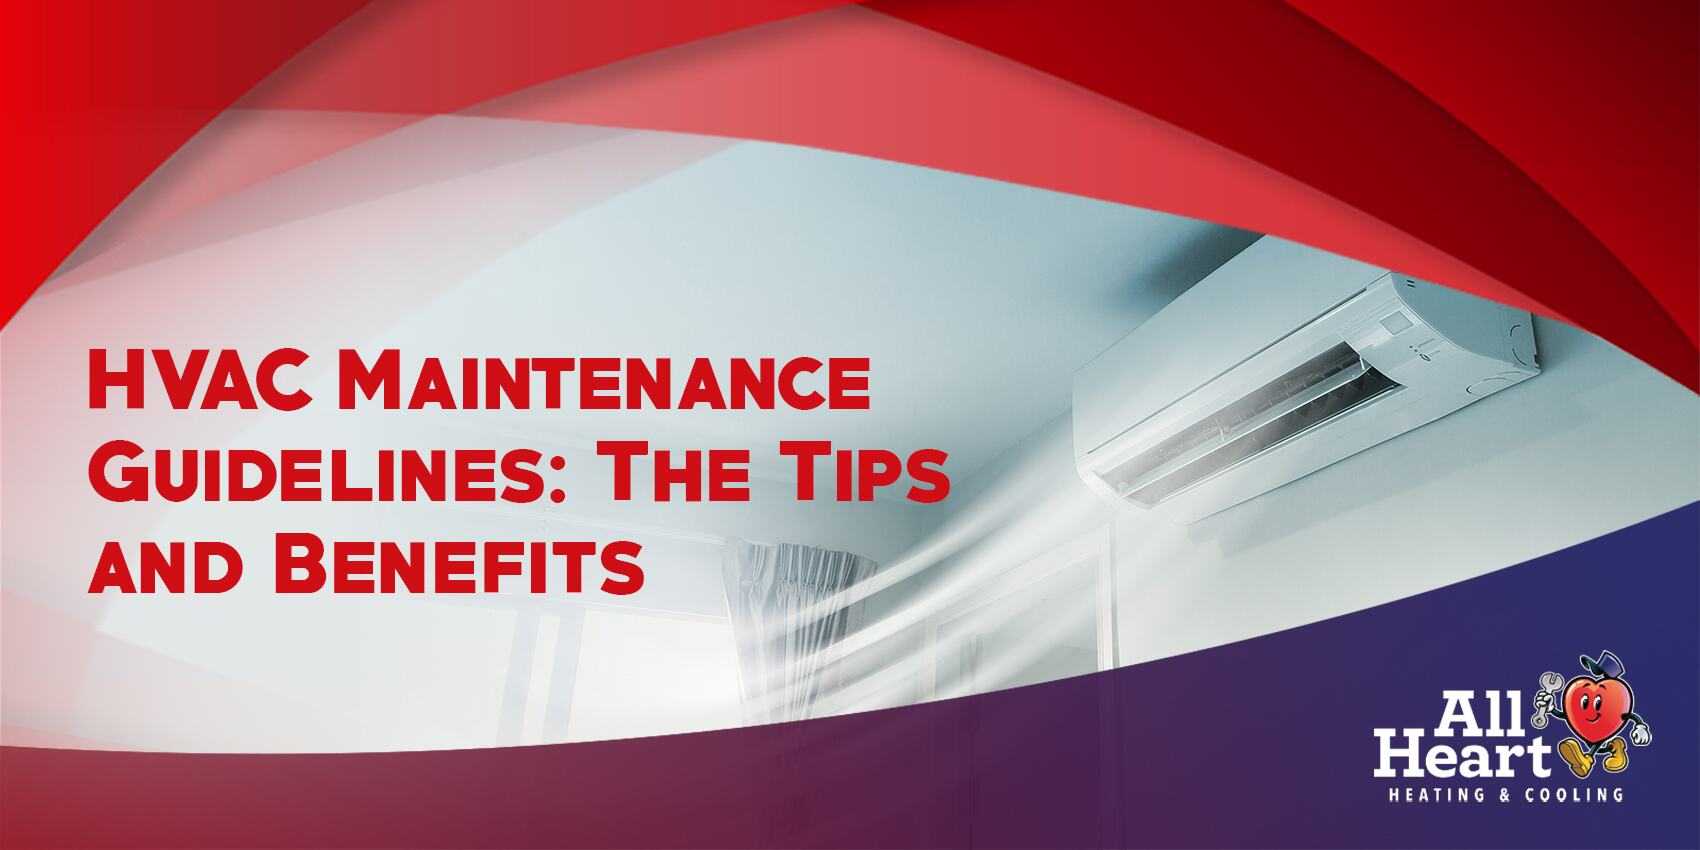 HVAC Maintenance Guidelines: The Tips and Benefits